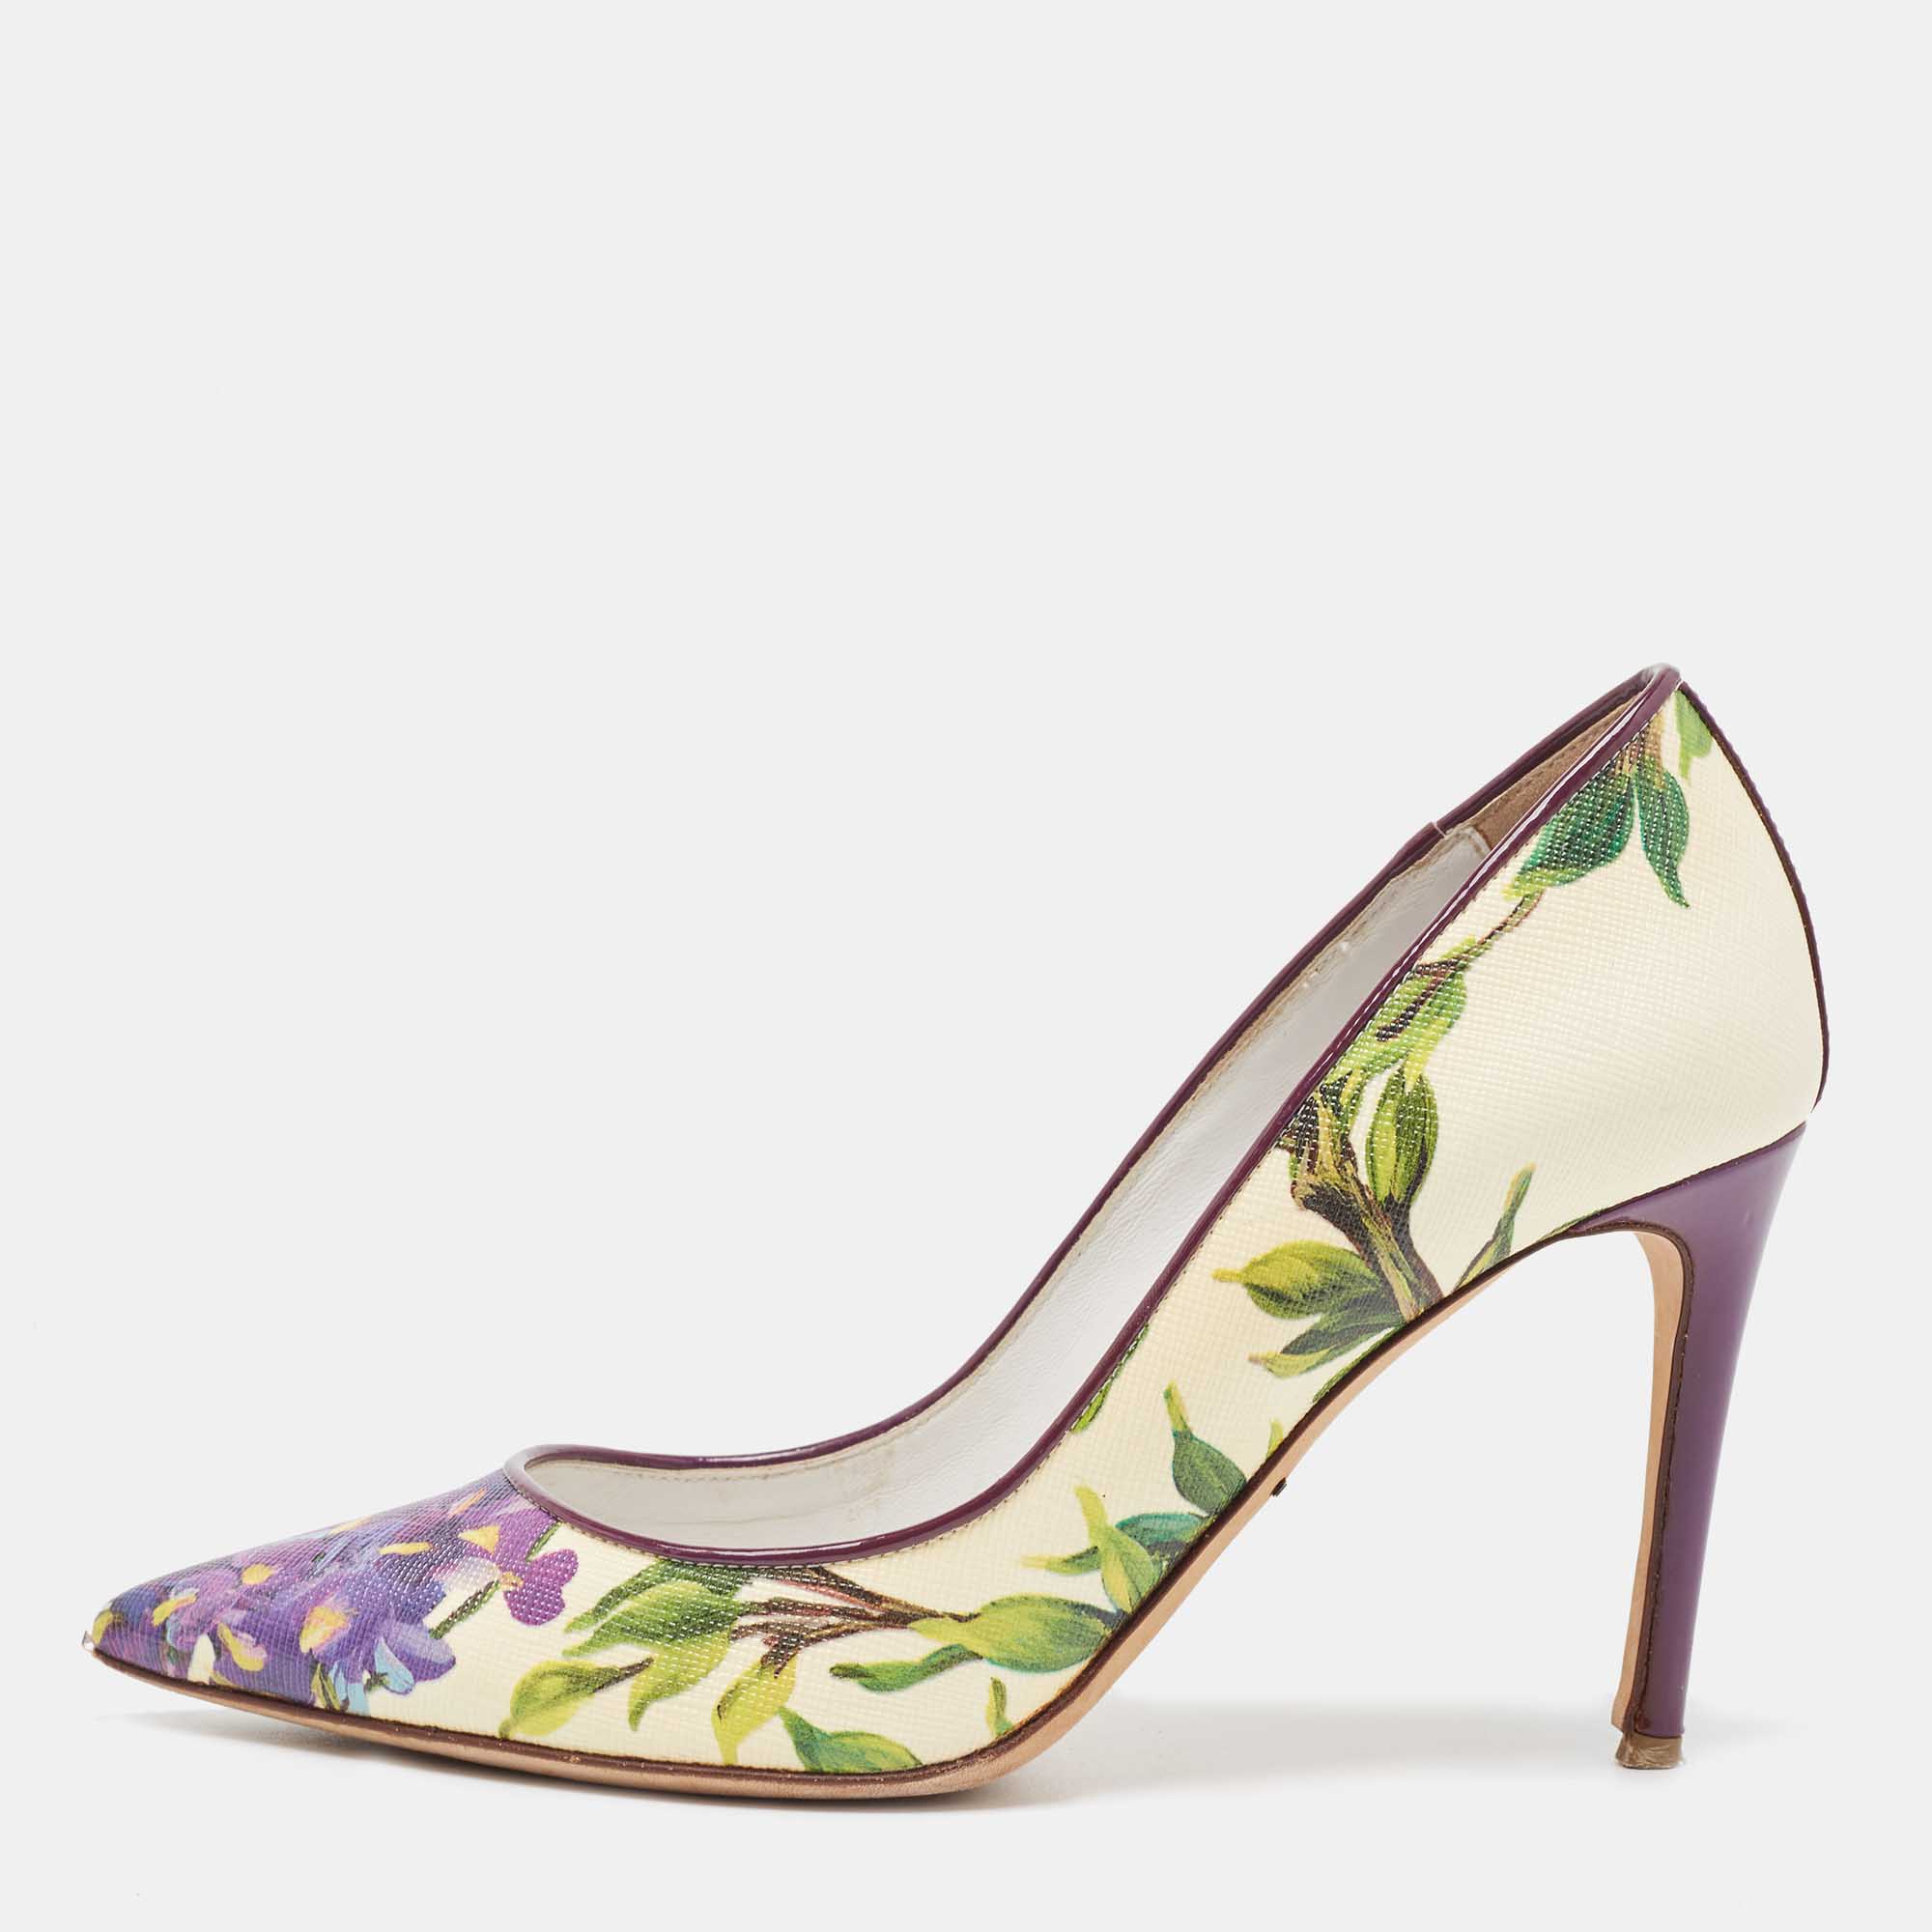 Dolce & Gabbana Multicolor Flower Printed Coated Canvas Wisteria Pumps Size 37.5